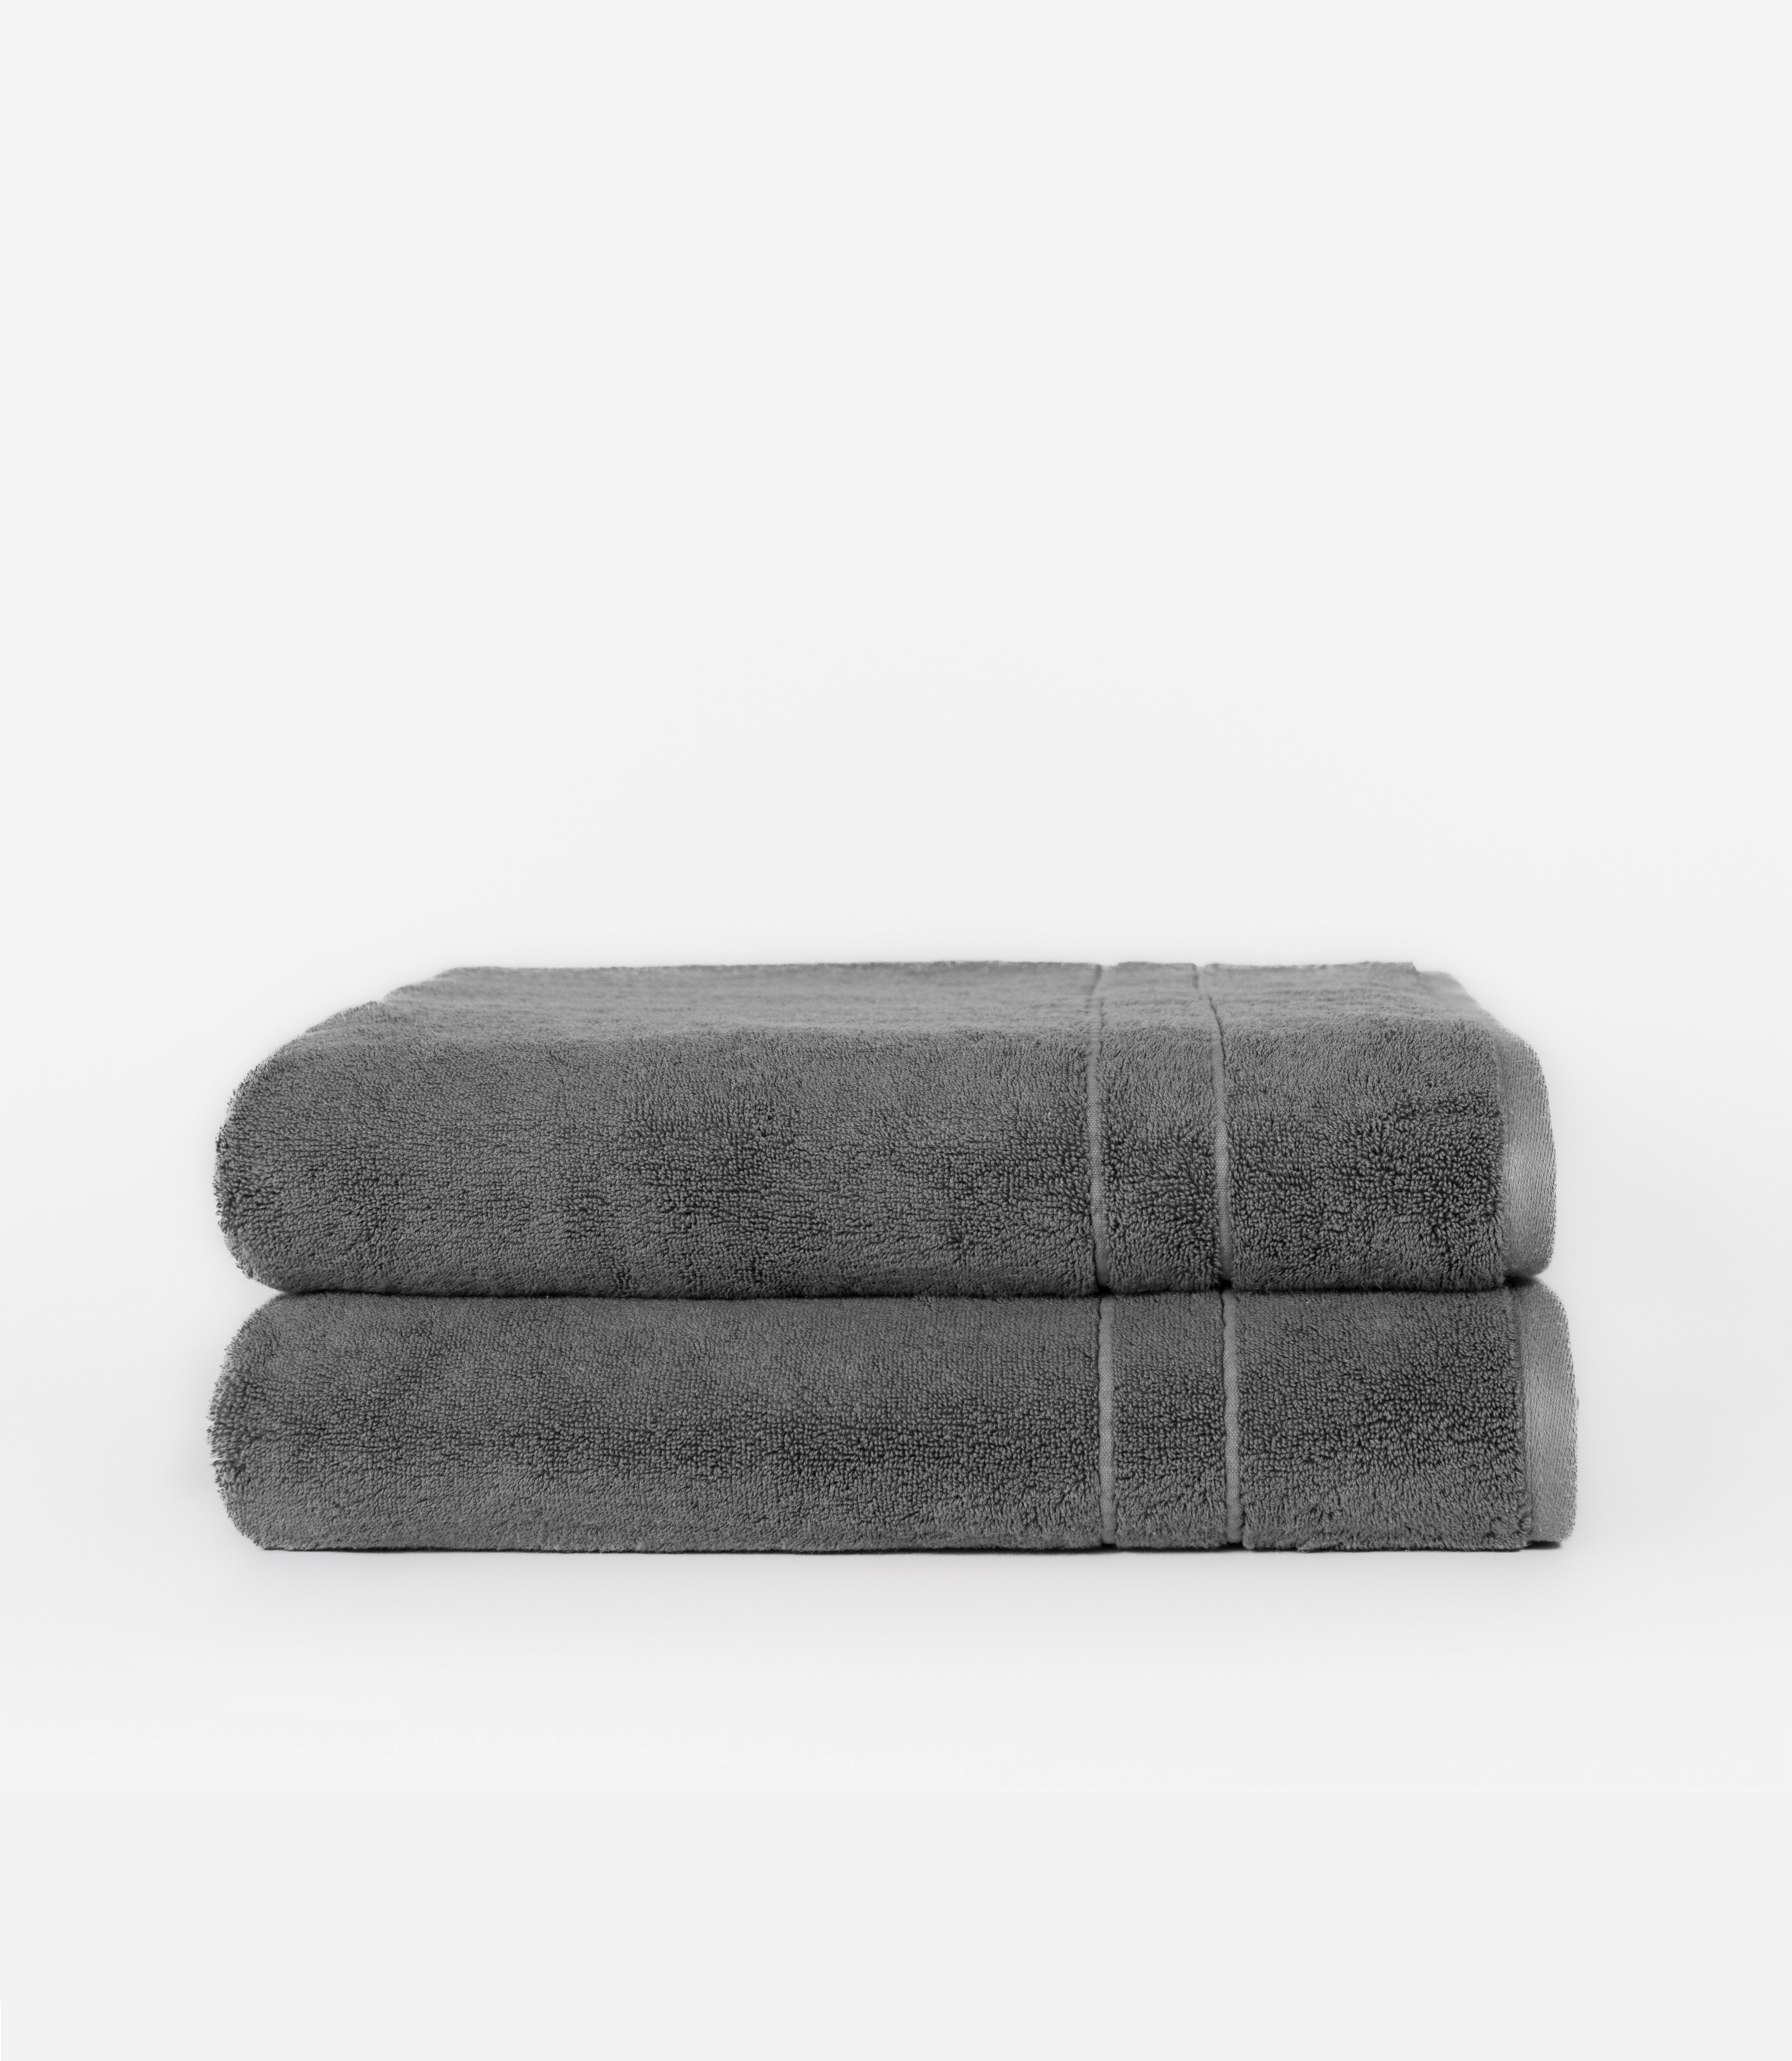 Premium Plush Bath Sheets in the color charcoal. Photo of bath sheets taken with white background |Color:Charcoal